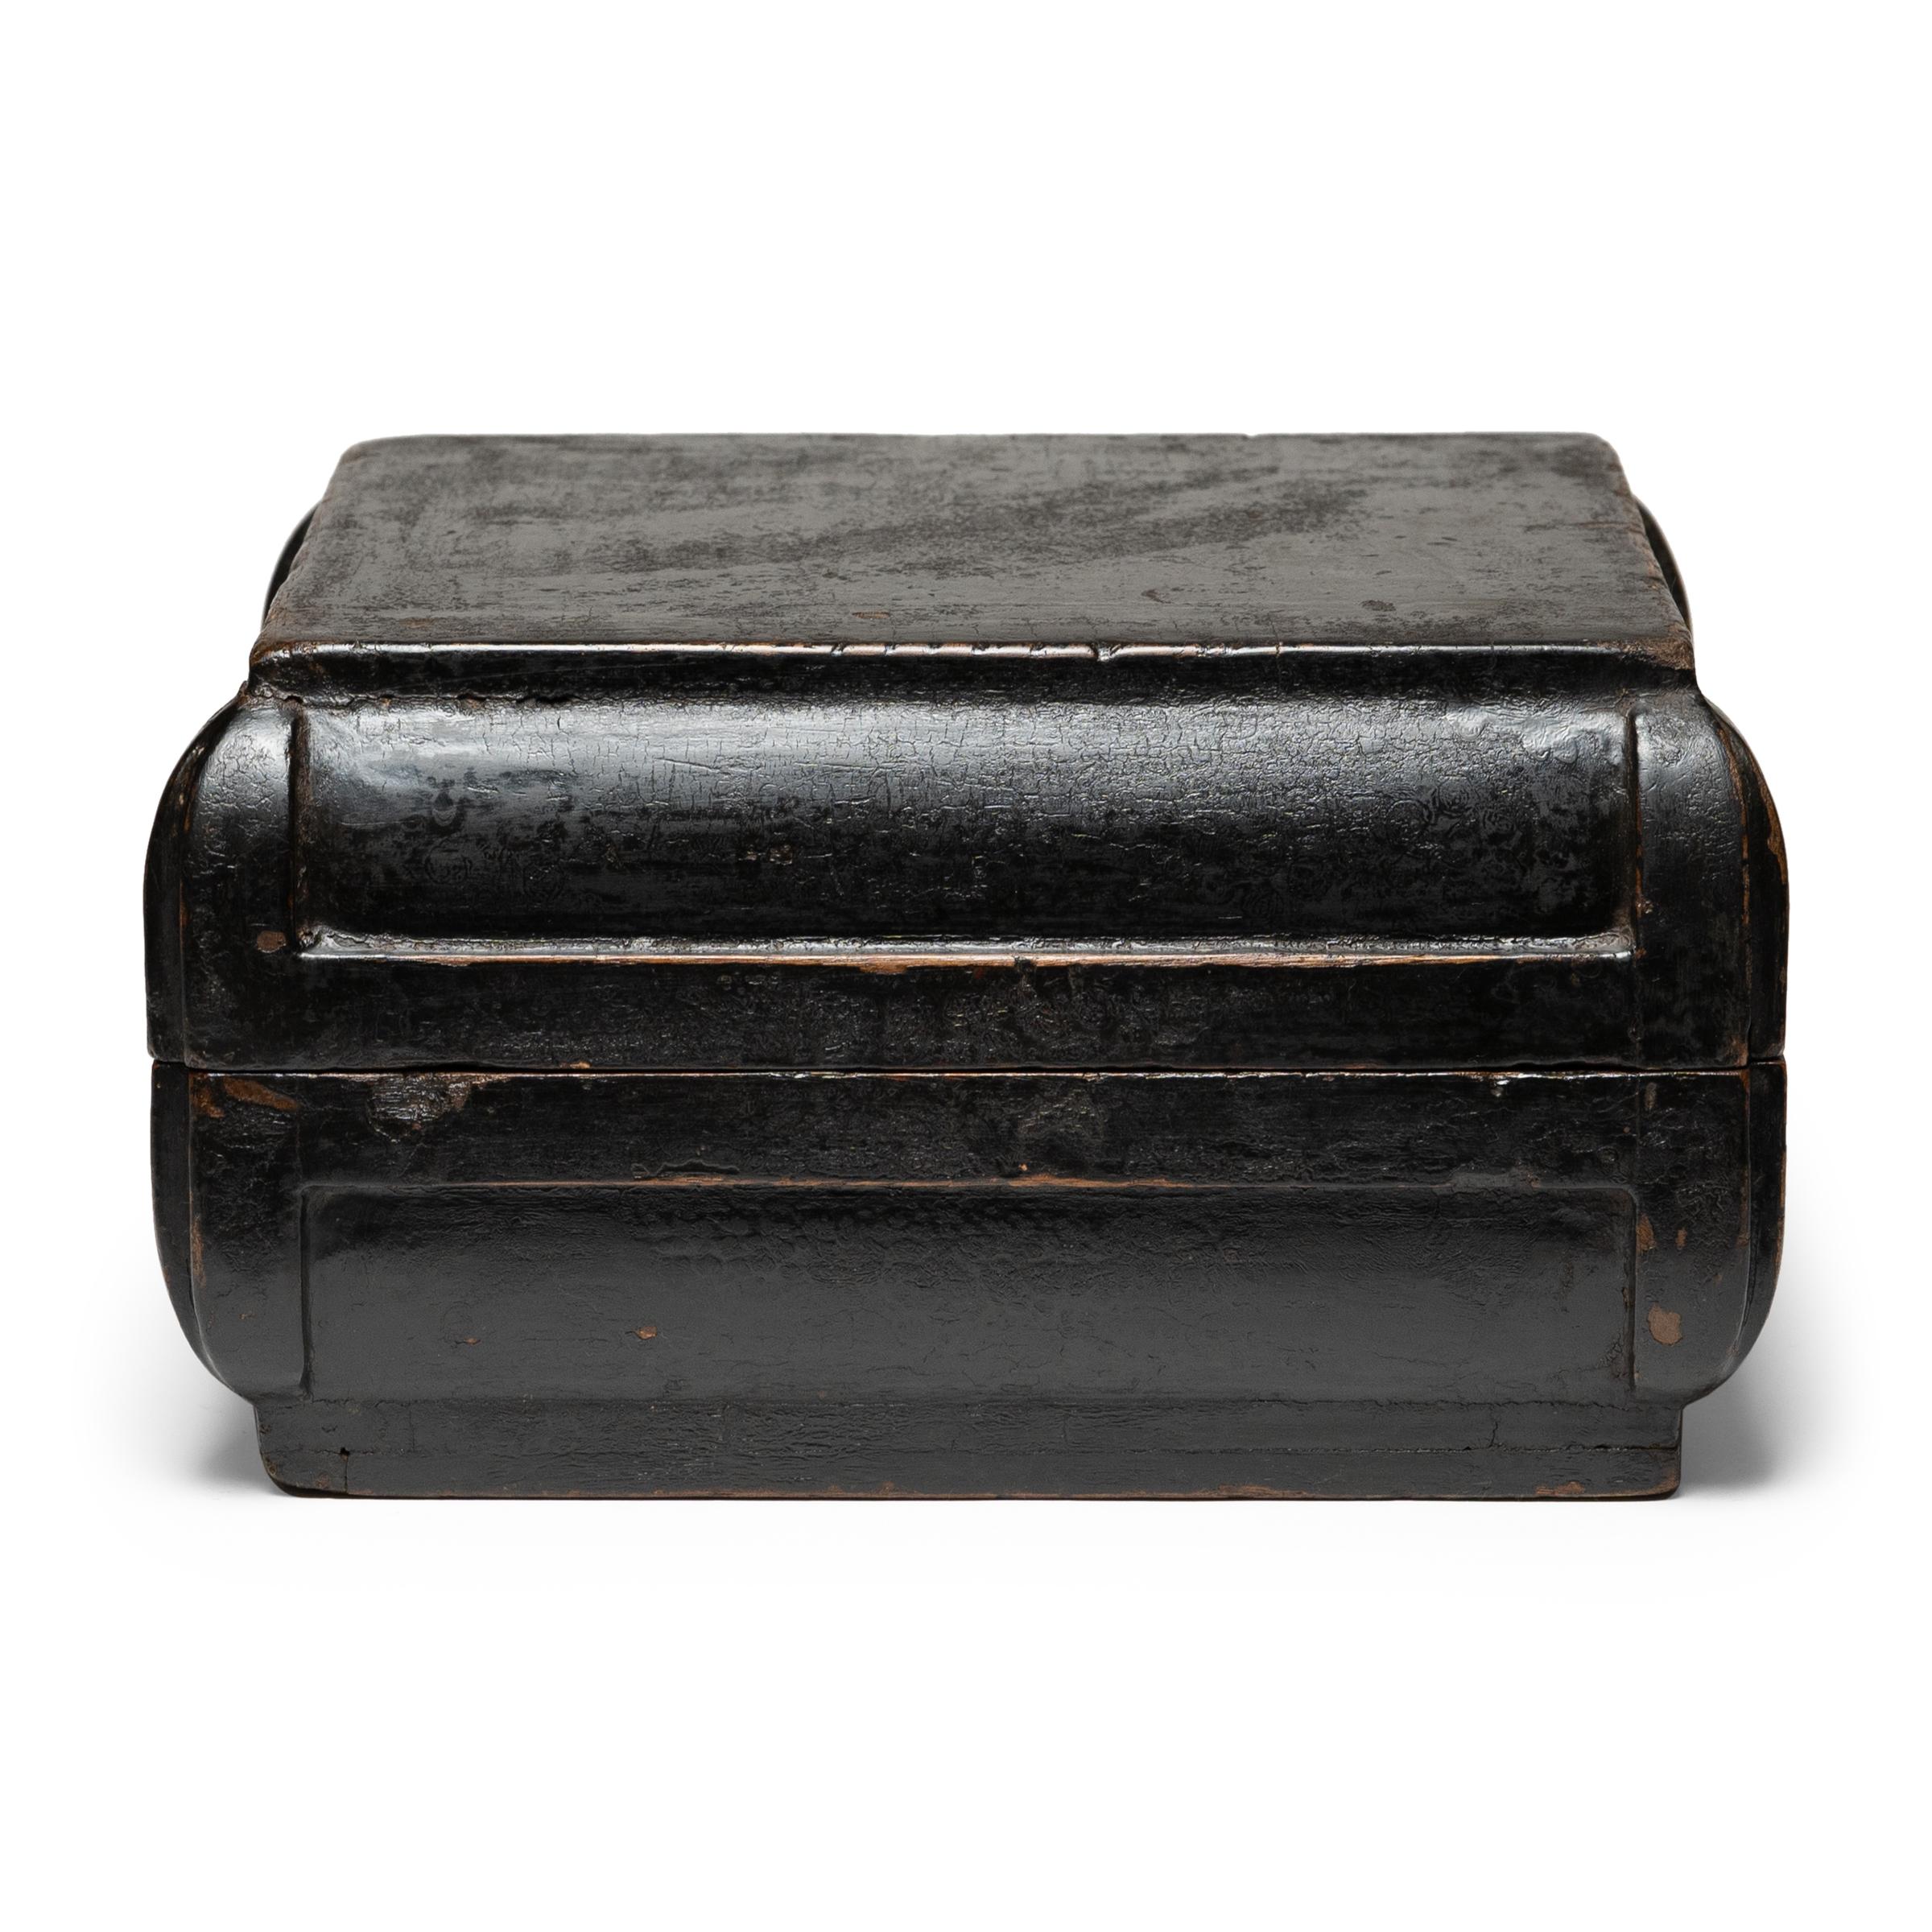 This simple lacquered container was once used as a 19th-century snack box, presented as a gift during holidays and special occasions. To the delight of the recipients, the unassuming box would have opened to reveal a bounty of popular snack foods,